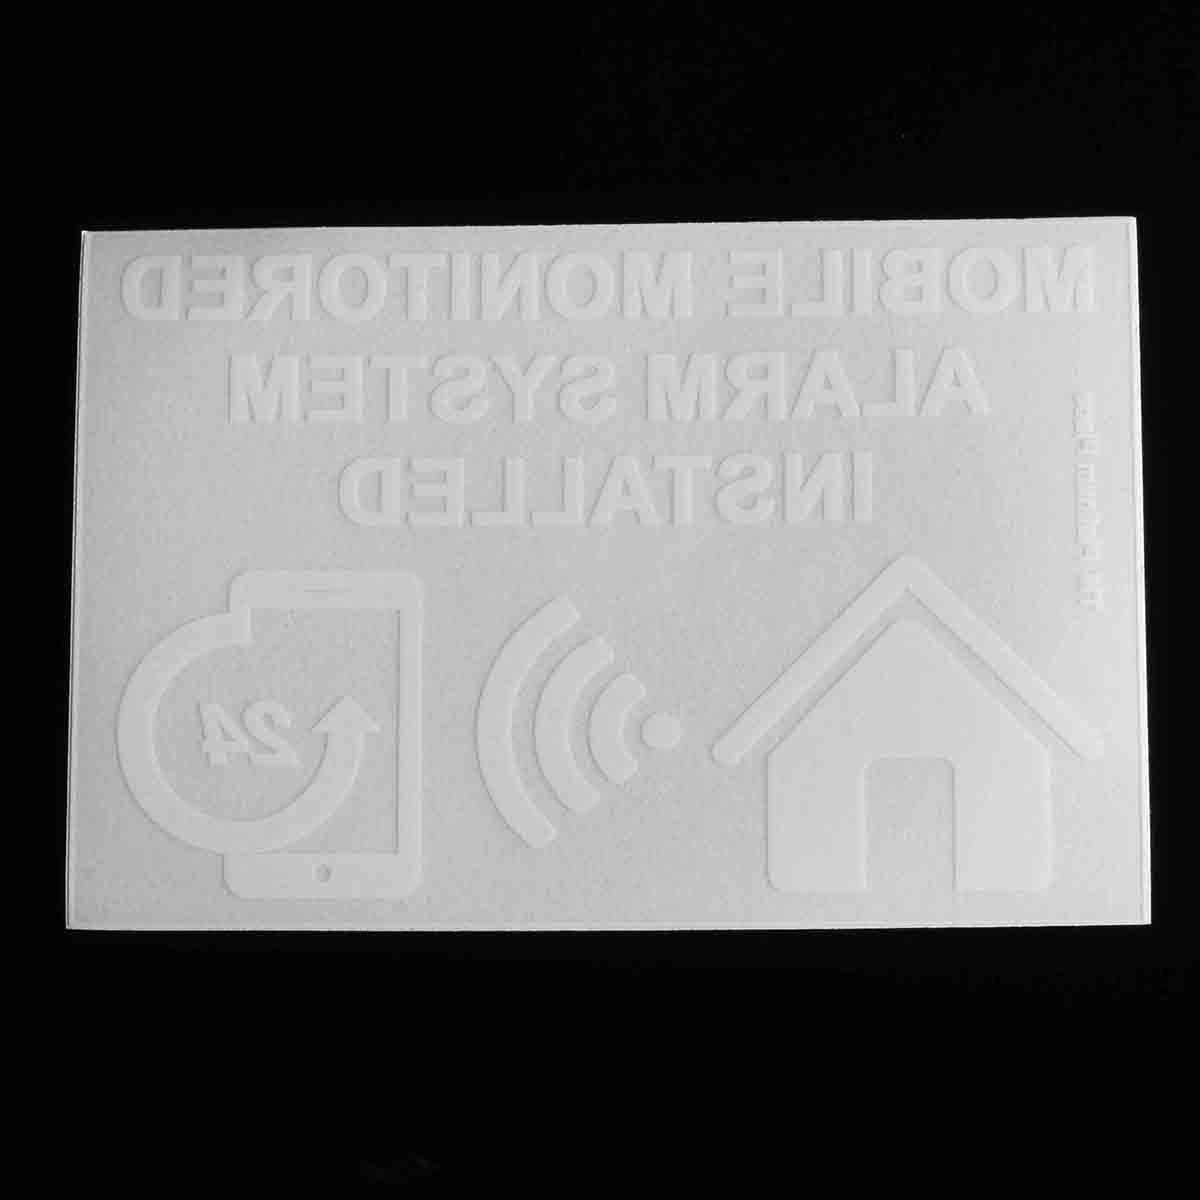 Safurance 6xMobile Monitored Alarm System Installed Warning Sign Internal Sticker 130x87mm Home Security Safety